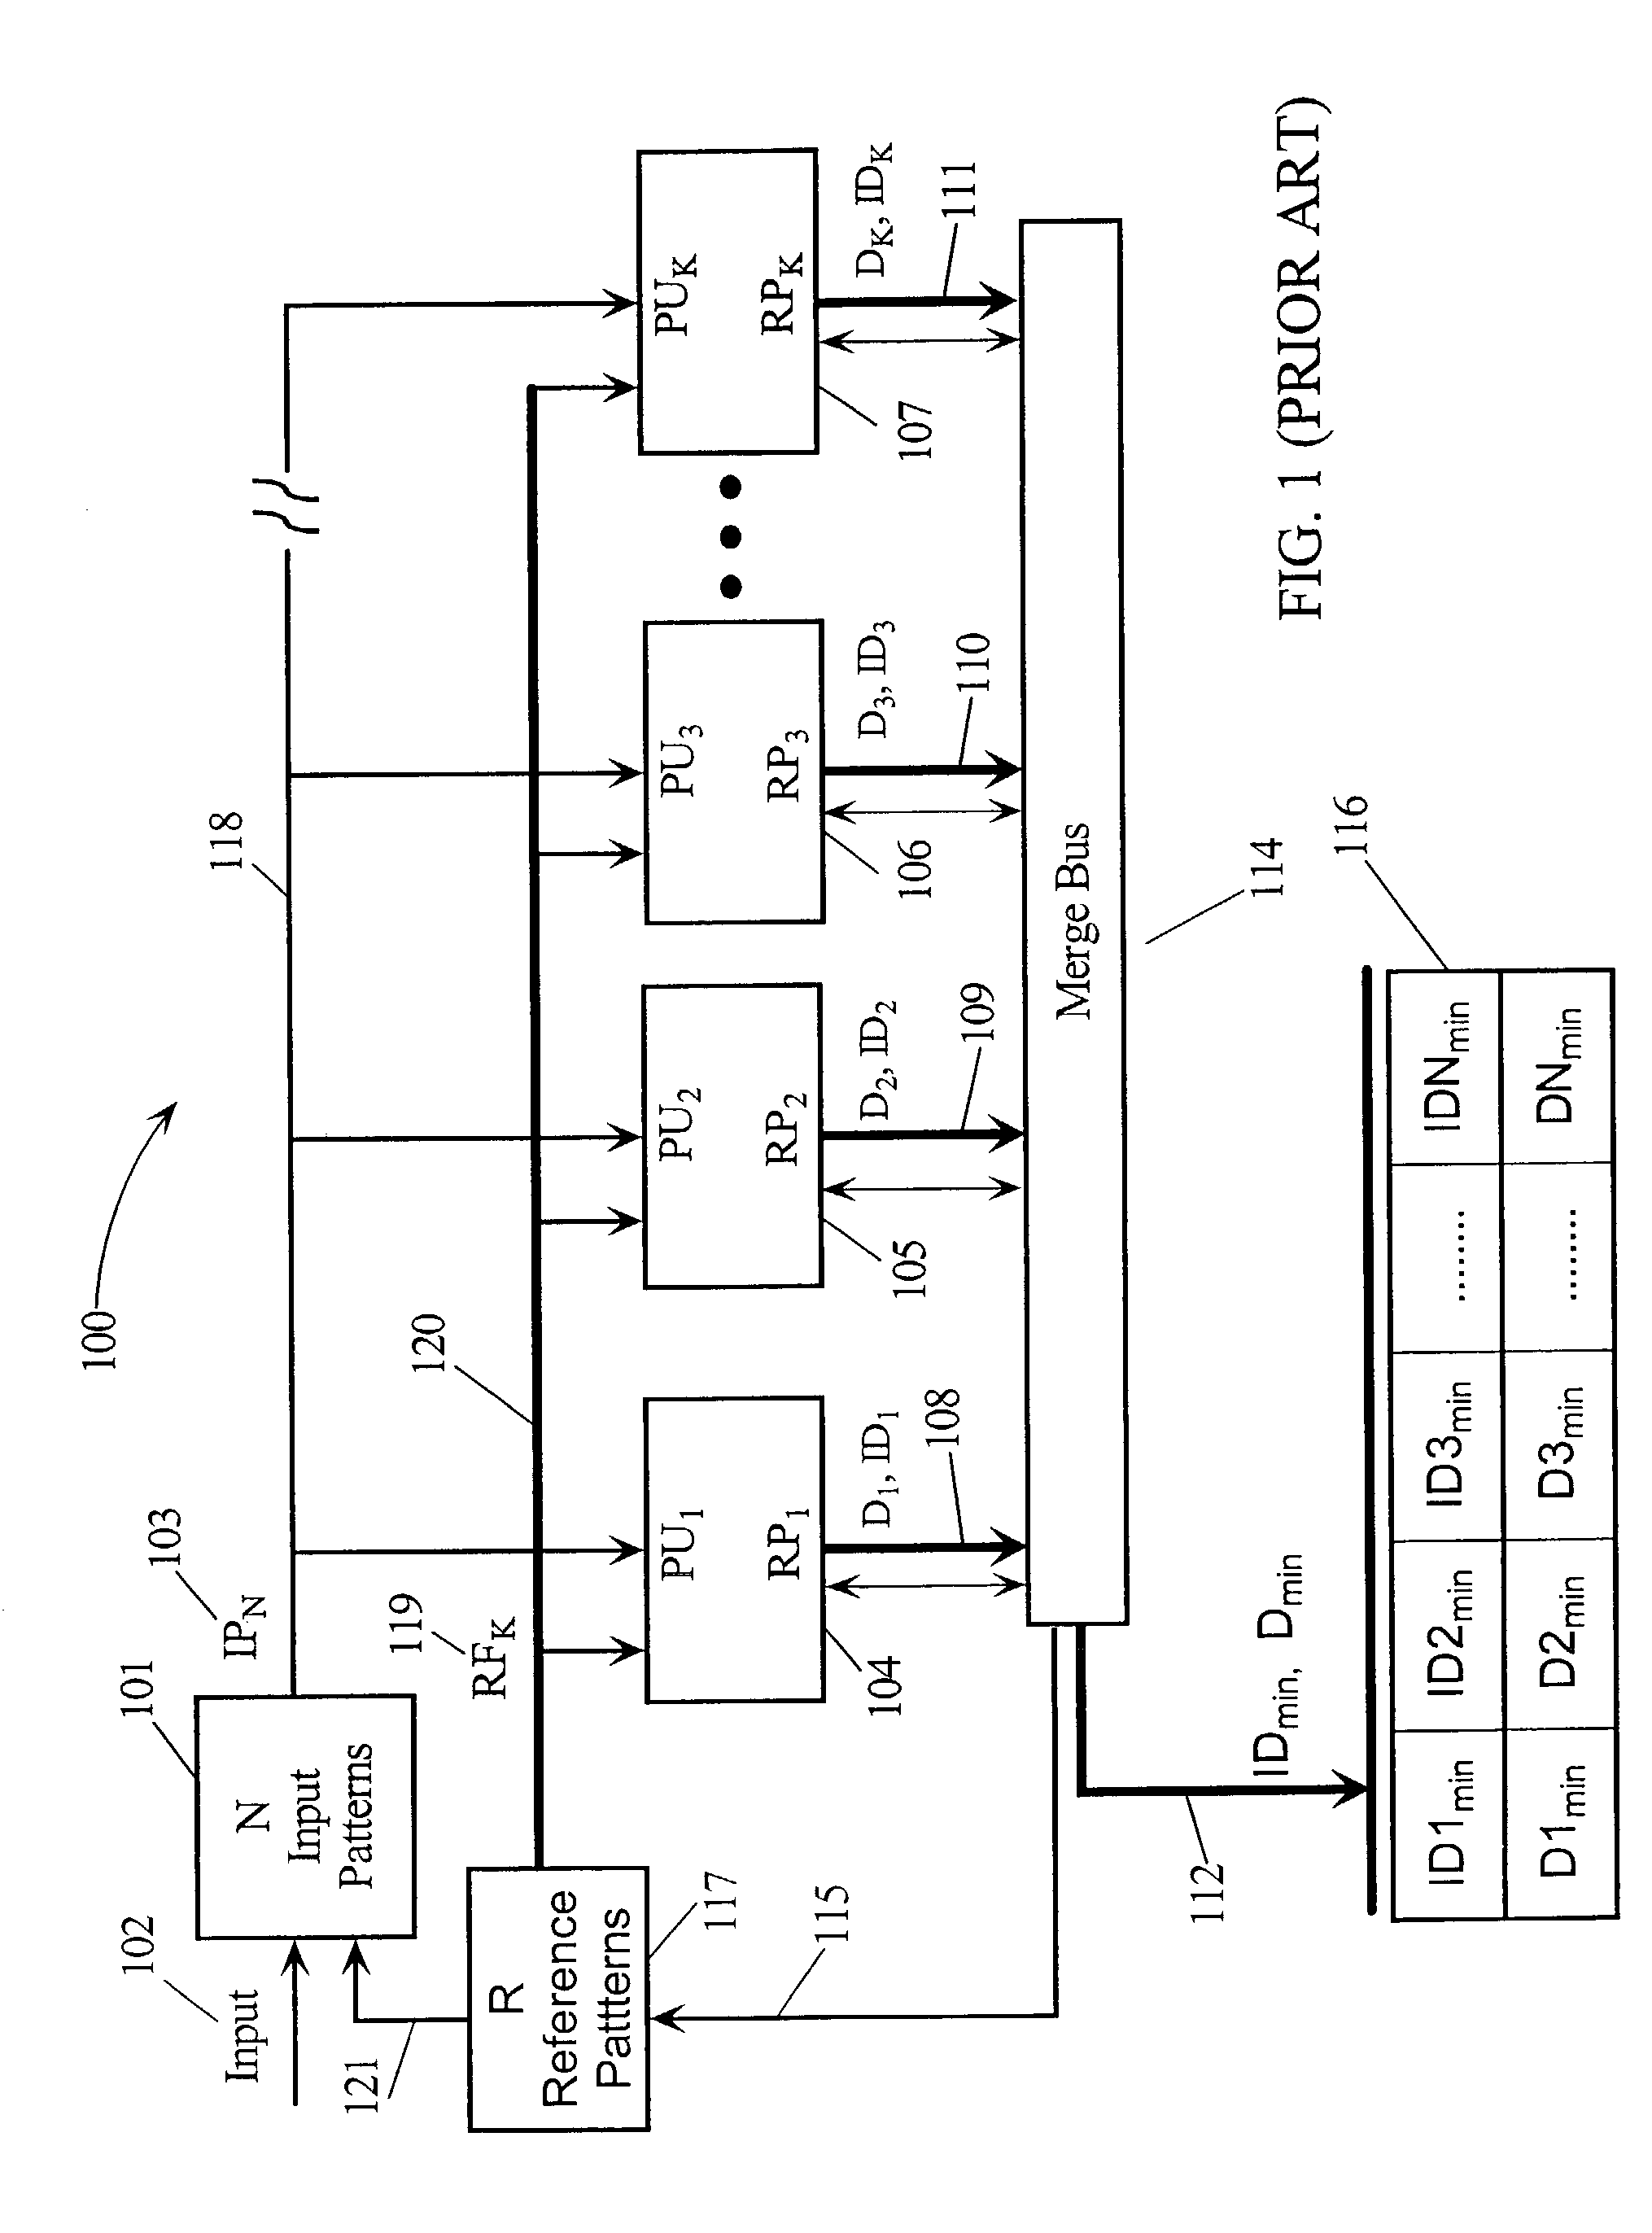 Method and apparatus for performing fast closest match in pattern recognition